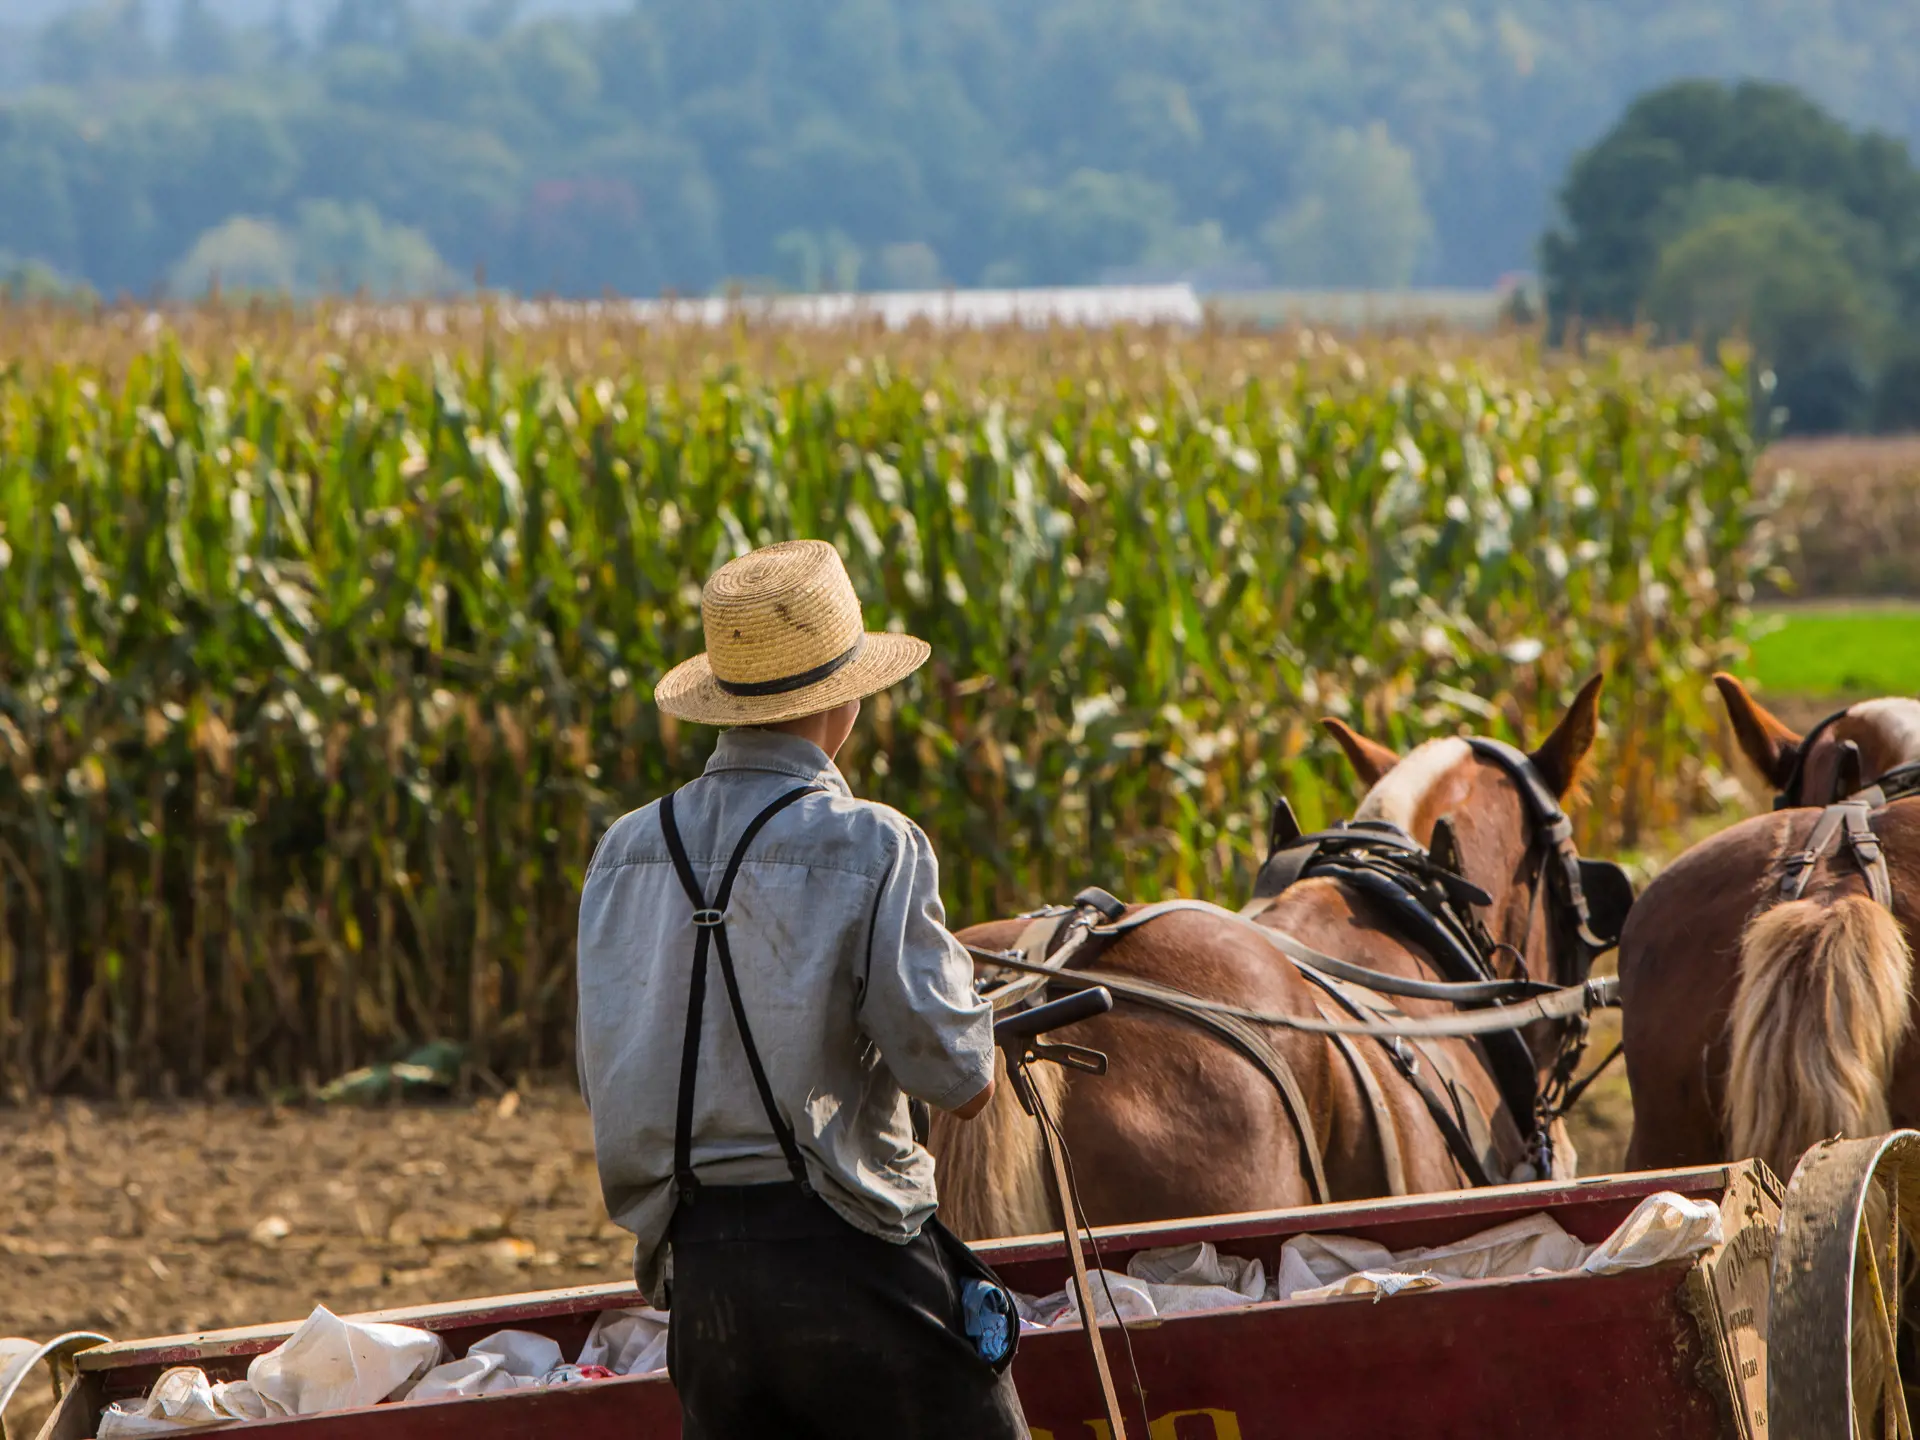 dag 4shutterstock_221091451 Young amish farmer behind horses sowing a field.jpg